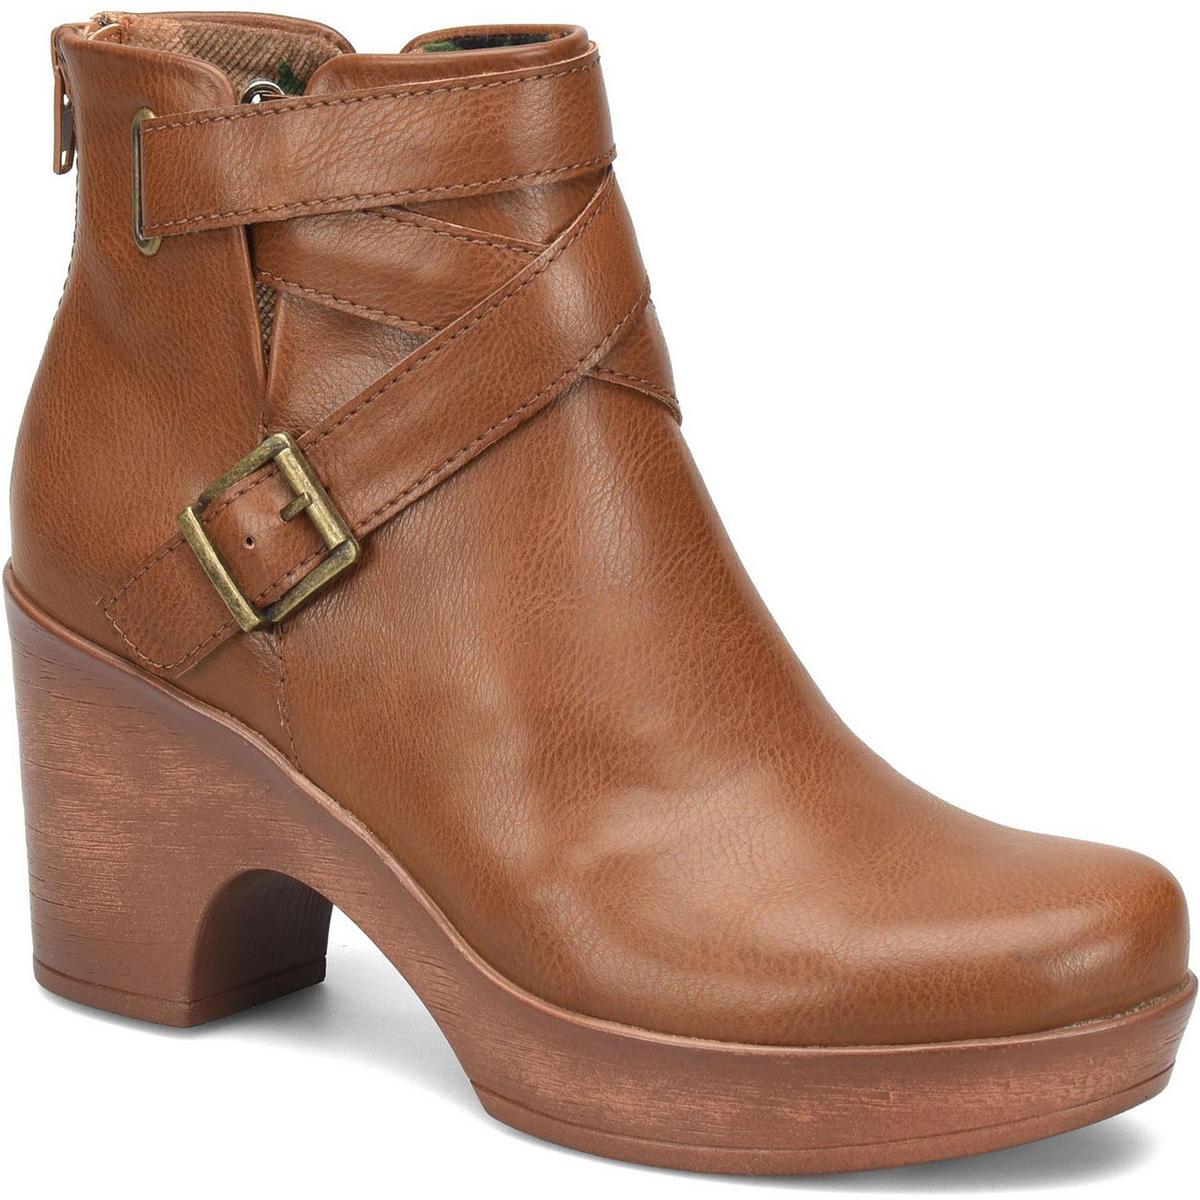 B.O.C. Briley Womens Faux Leather Ankle Boots